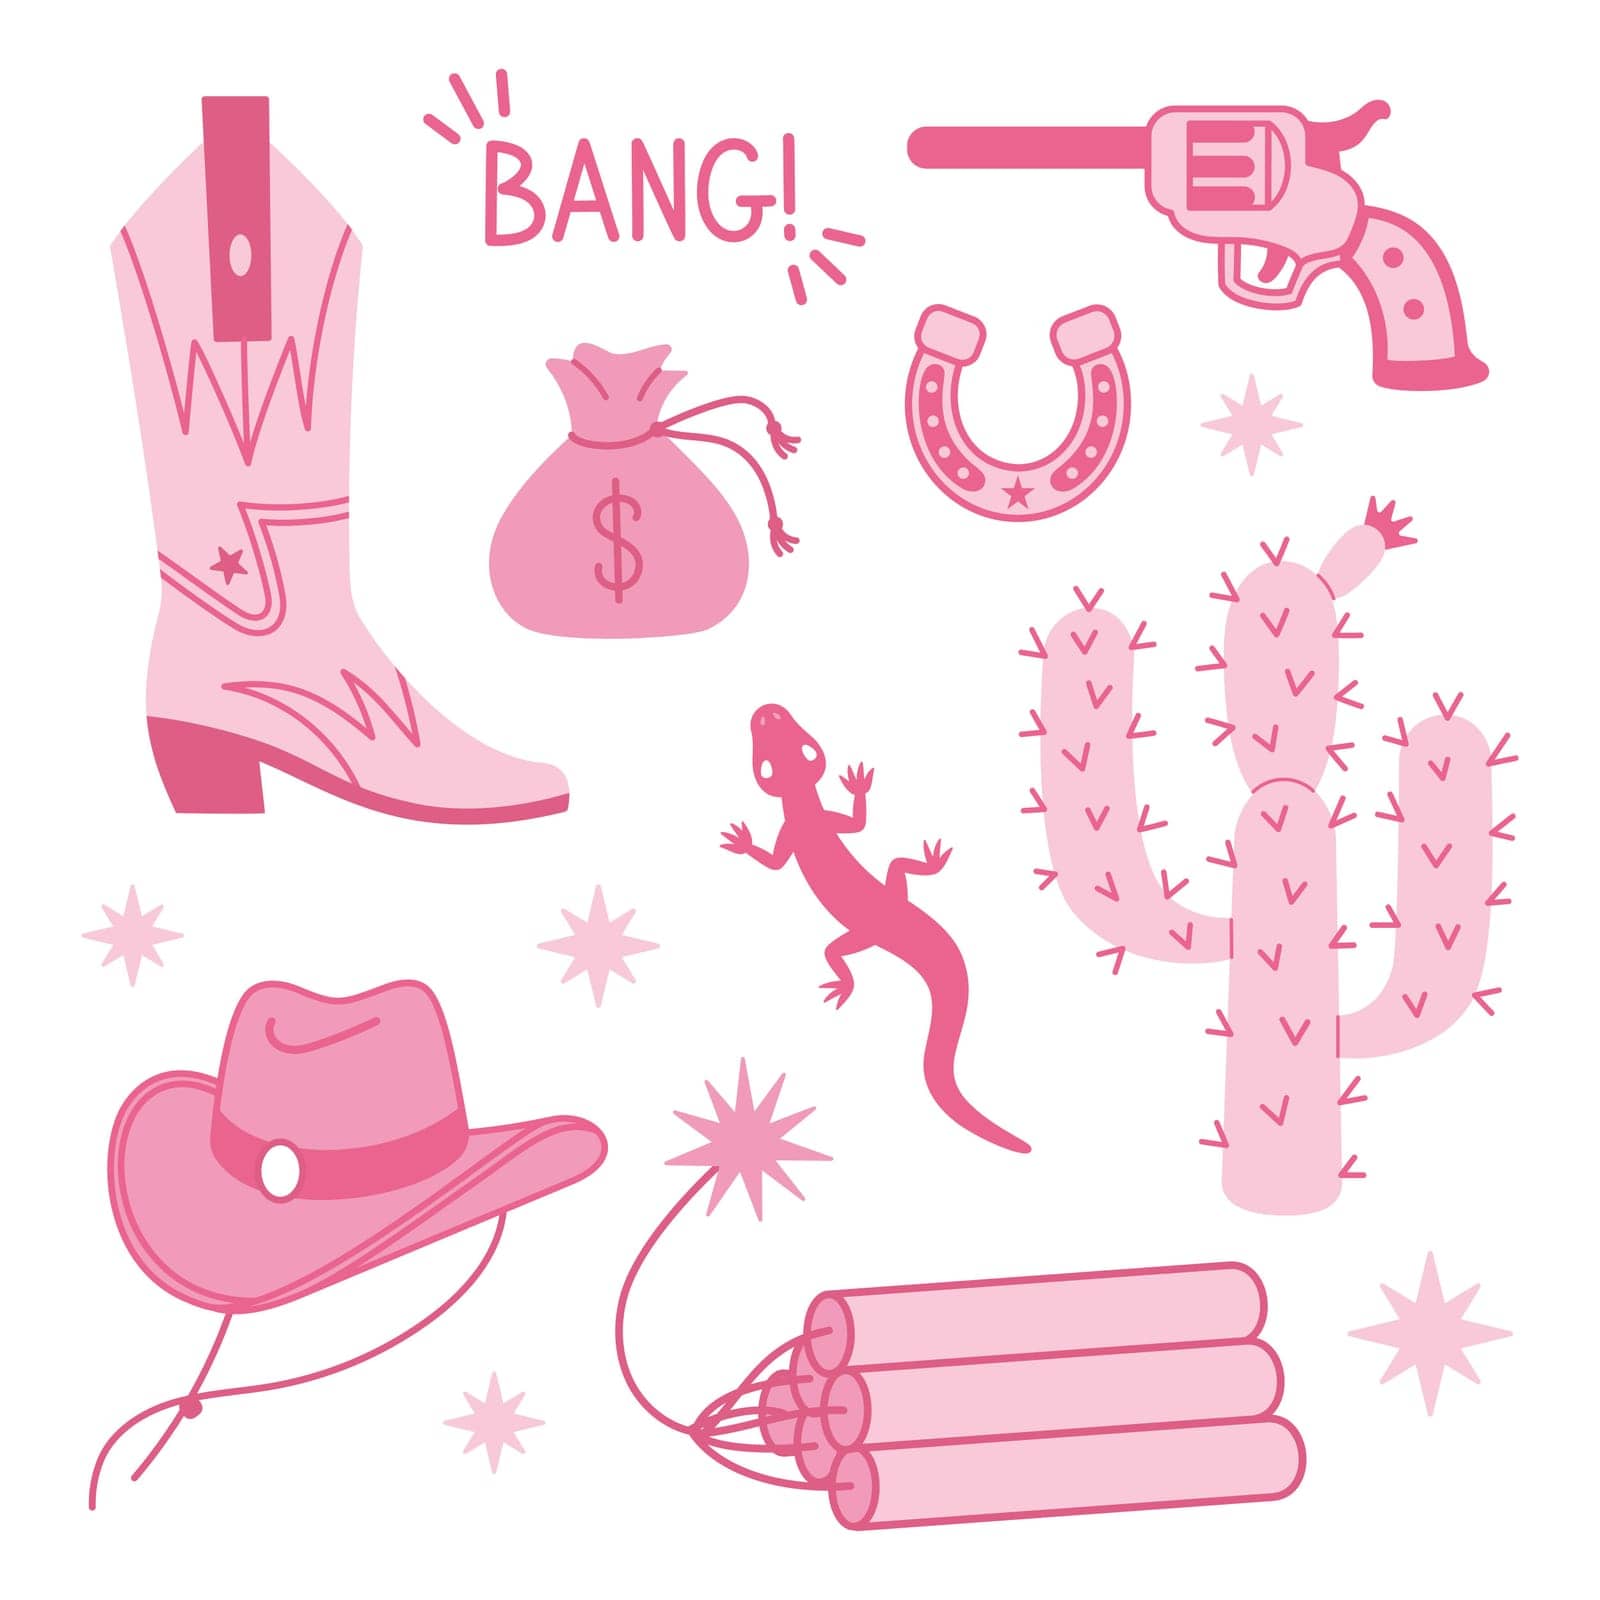 Cowboy Pink core fashion elements collection. Cowgirl boots, hat, horseshoe, cactus, and lettering. Cowboy western and wild west theme set. Hand drawn vector illustration. Doodle icons